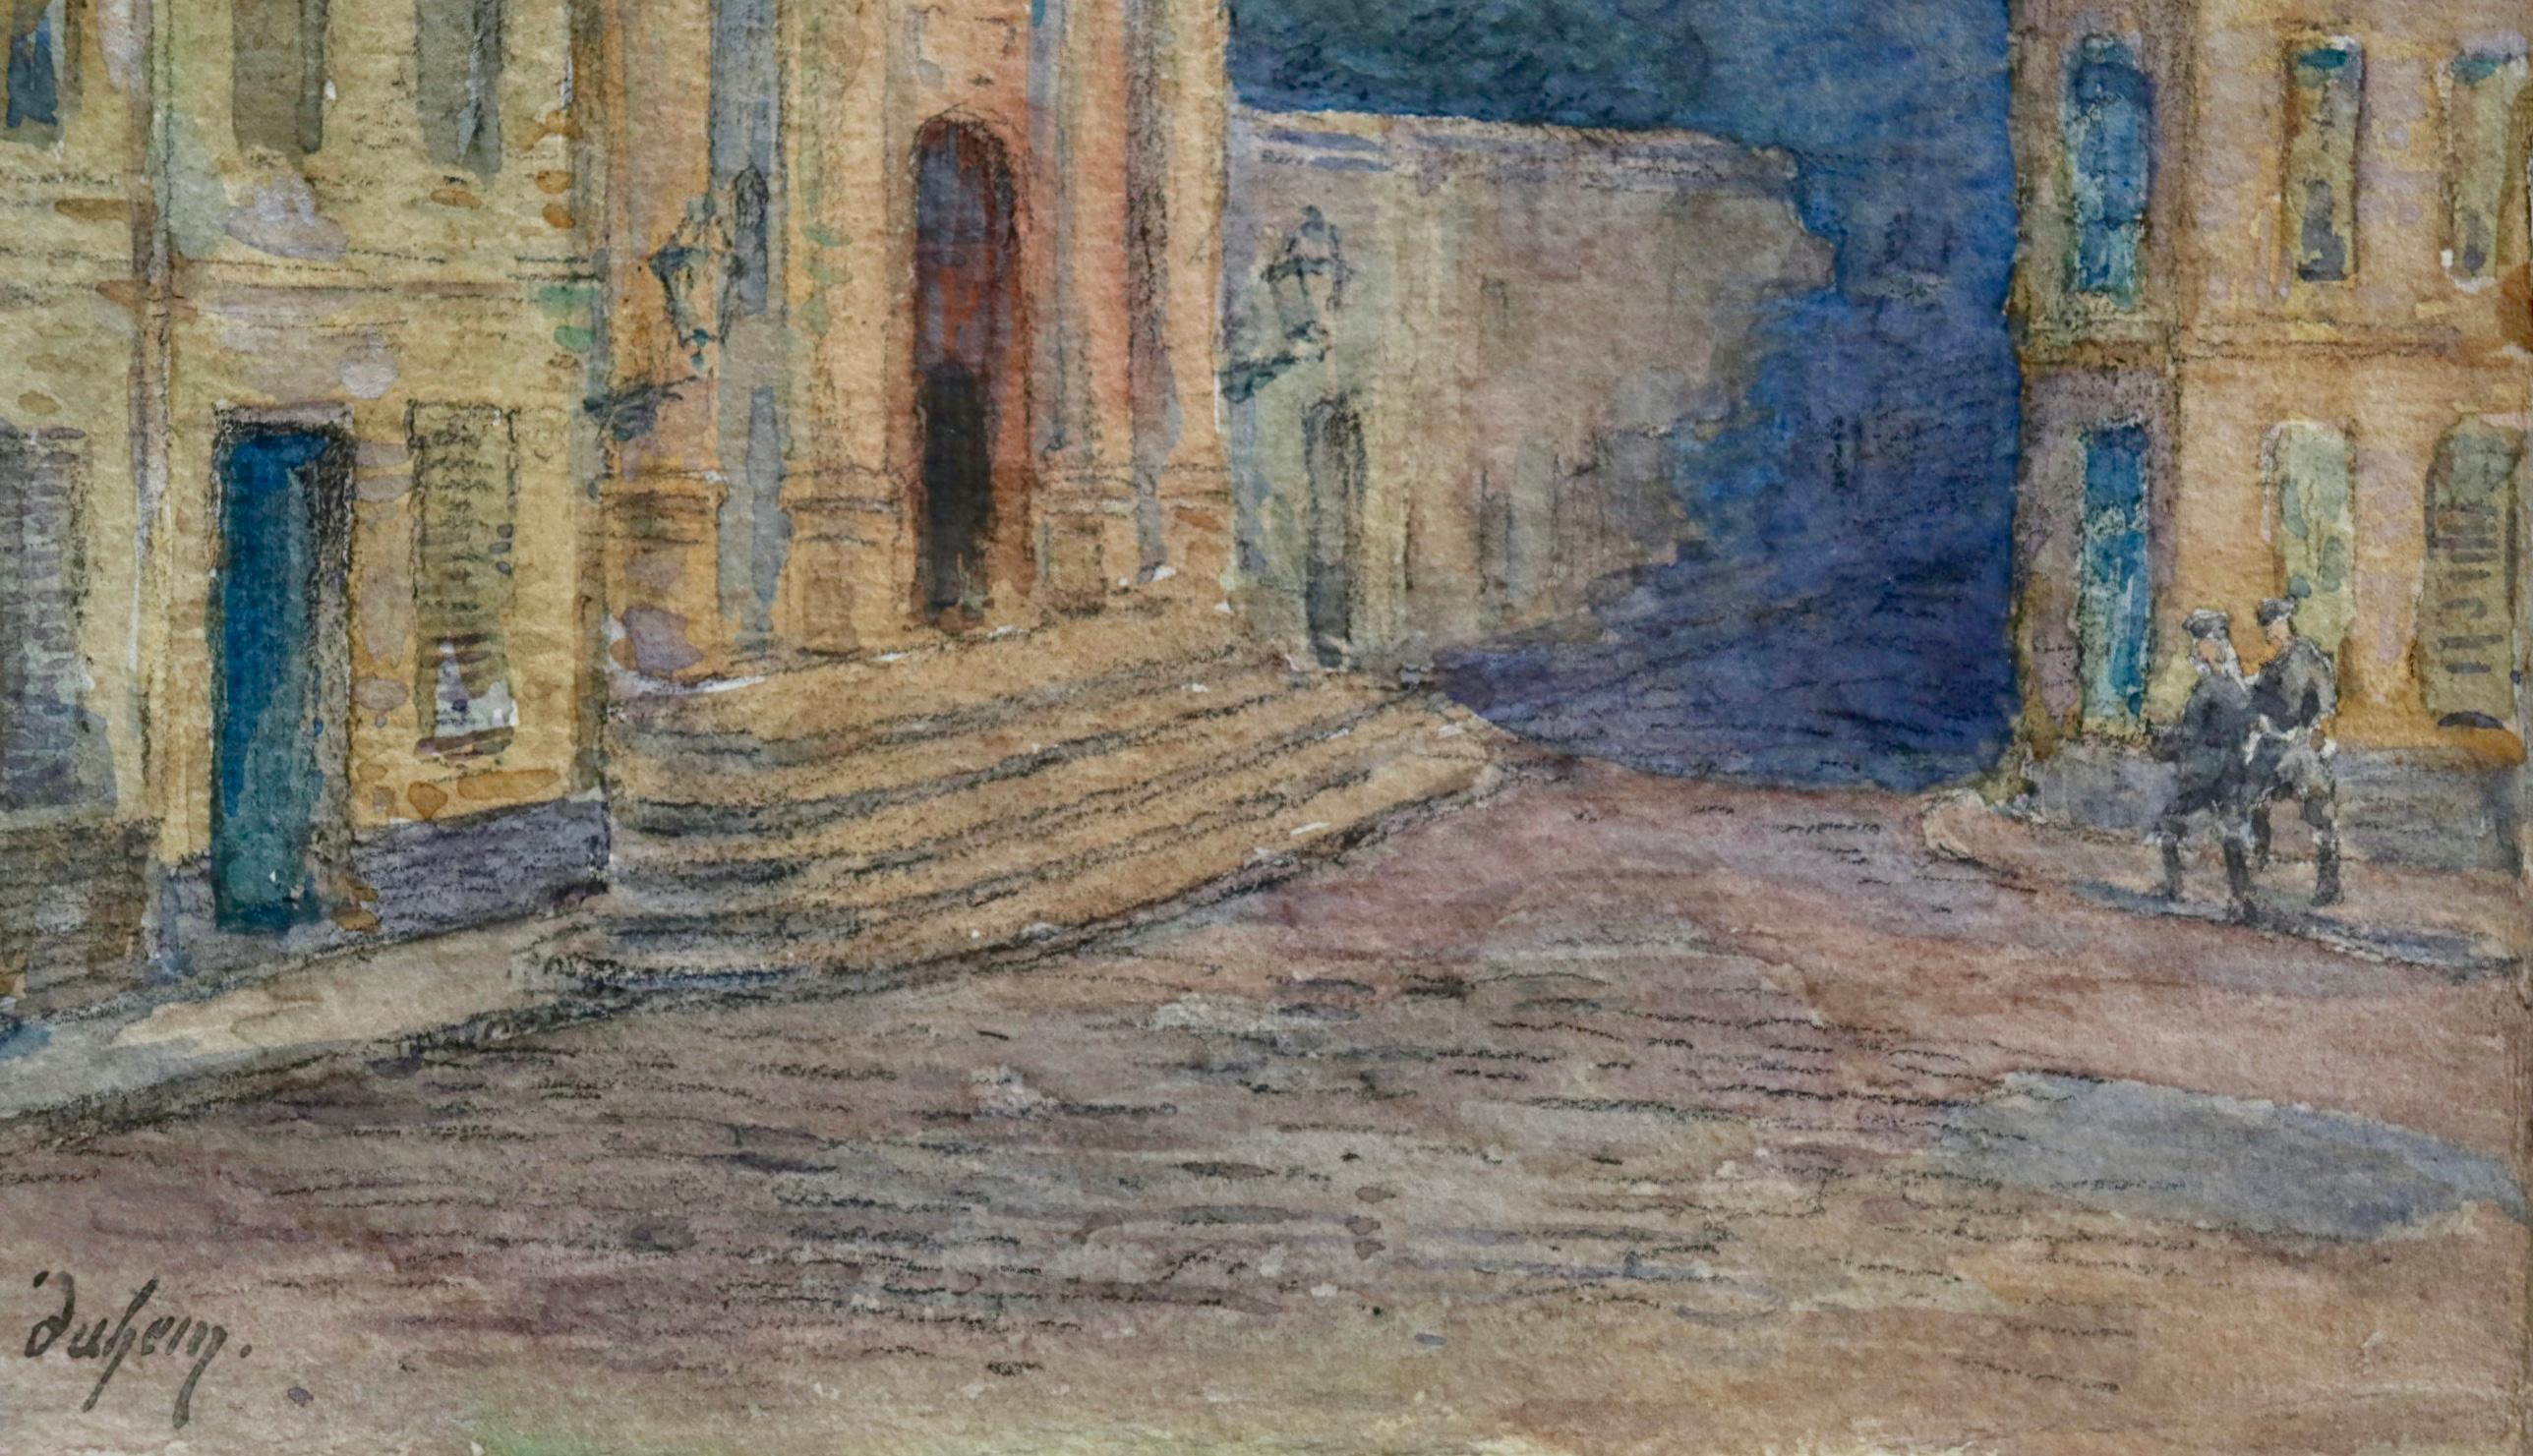 Watercolour on card circa 1915 by French Impressionist painter Henri Duhem depicting two soldiers walking through an empty town square at night. Signed lower left. This piece is not currently framed but a suitable frame can be sourced if